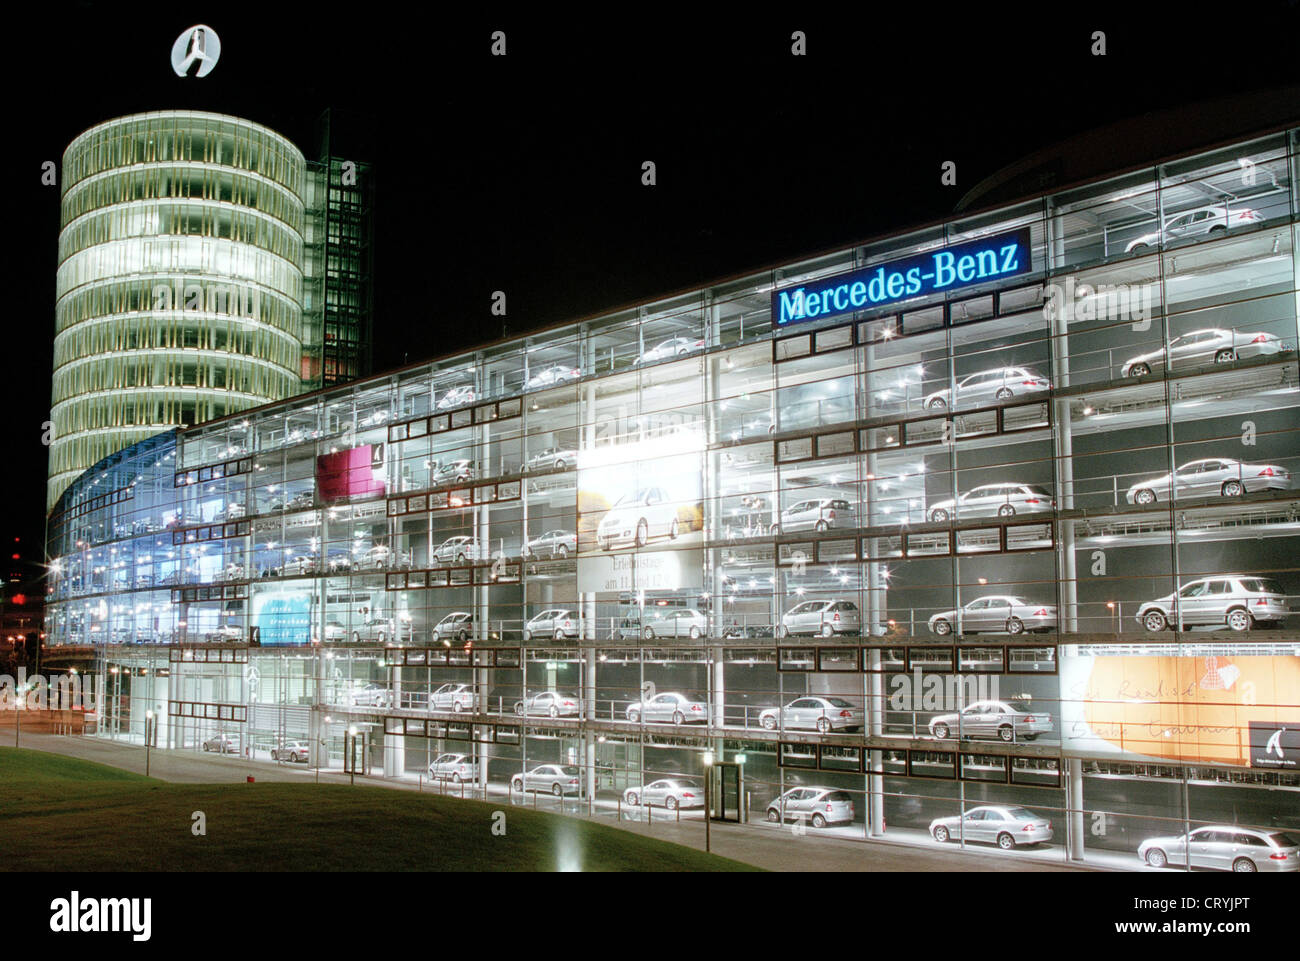 The Mercedes Benz dealership in Munich at night Stock Photo